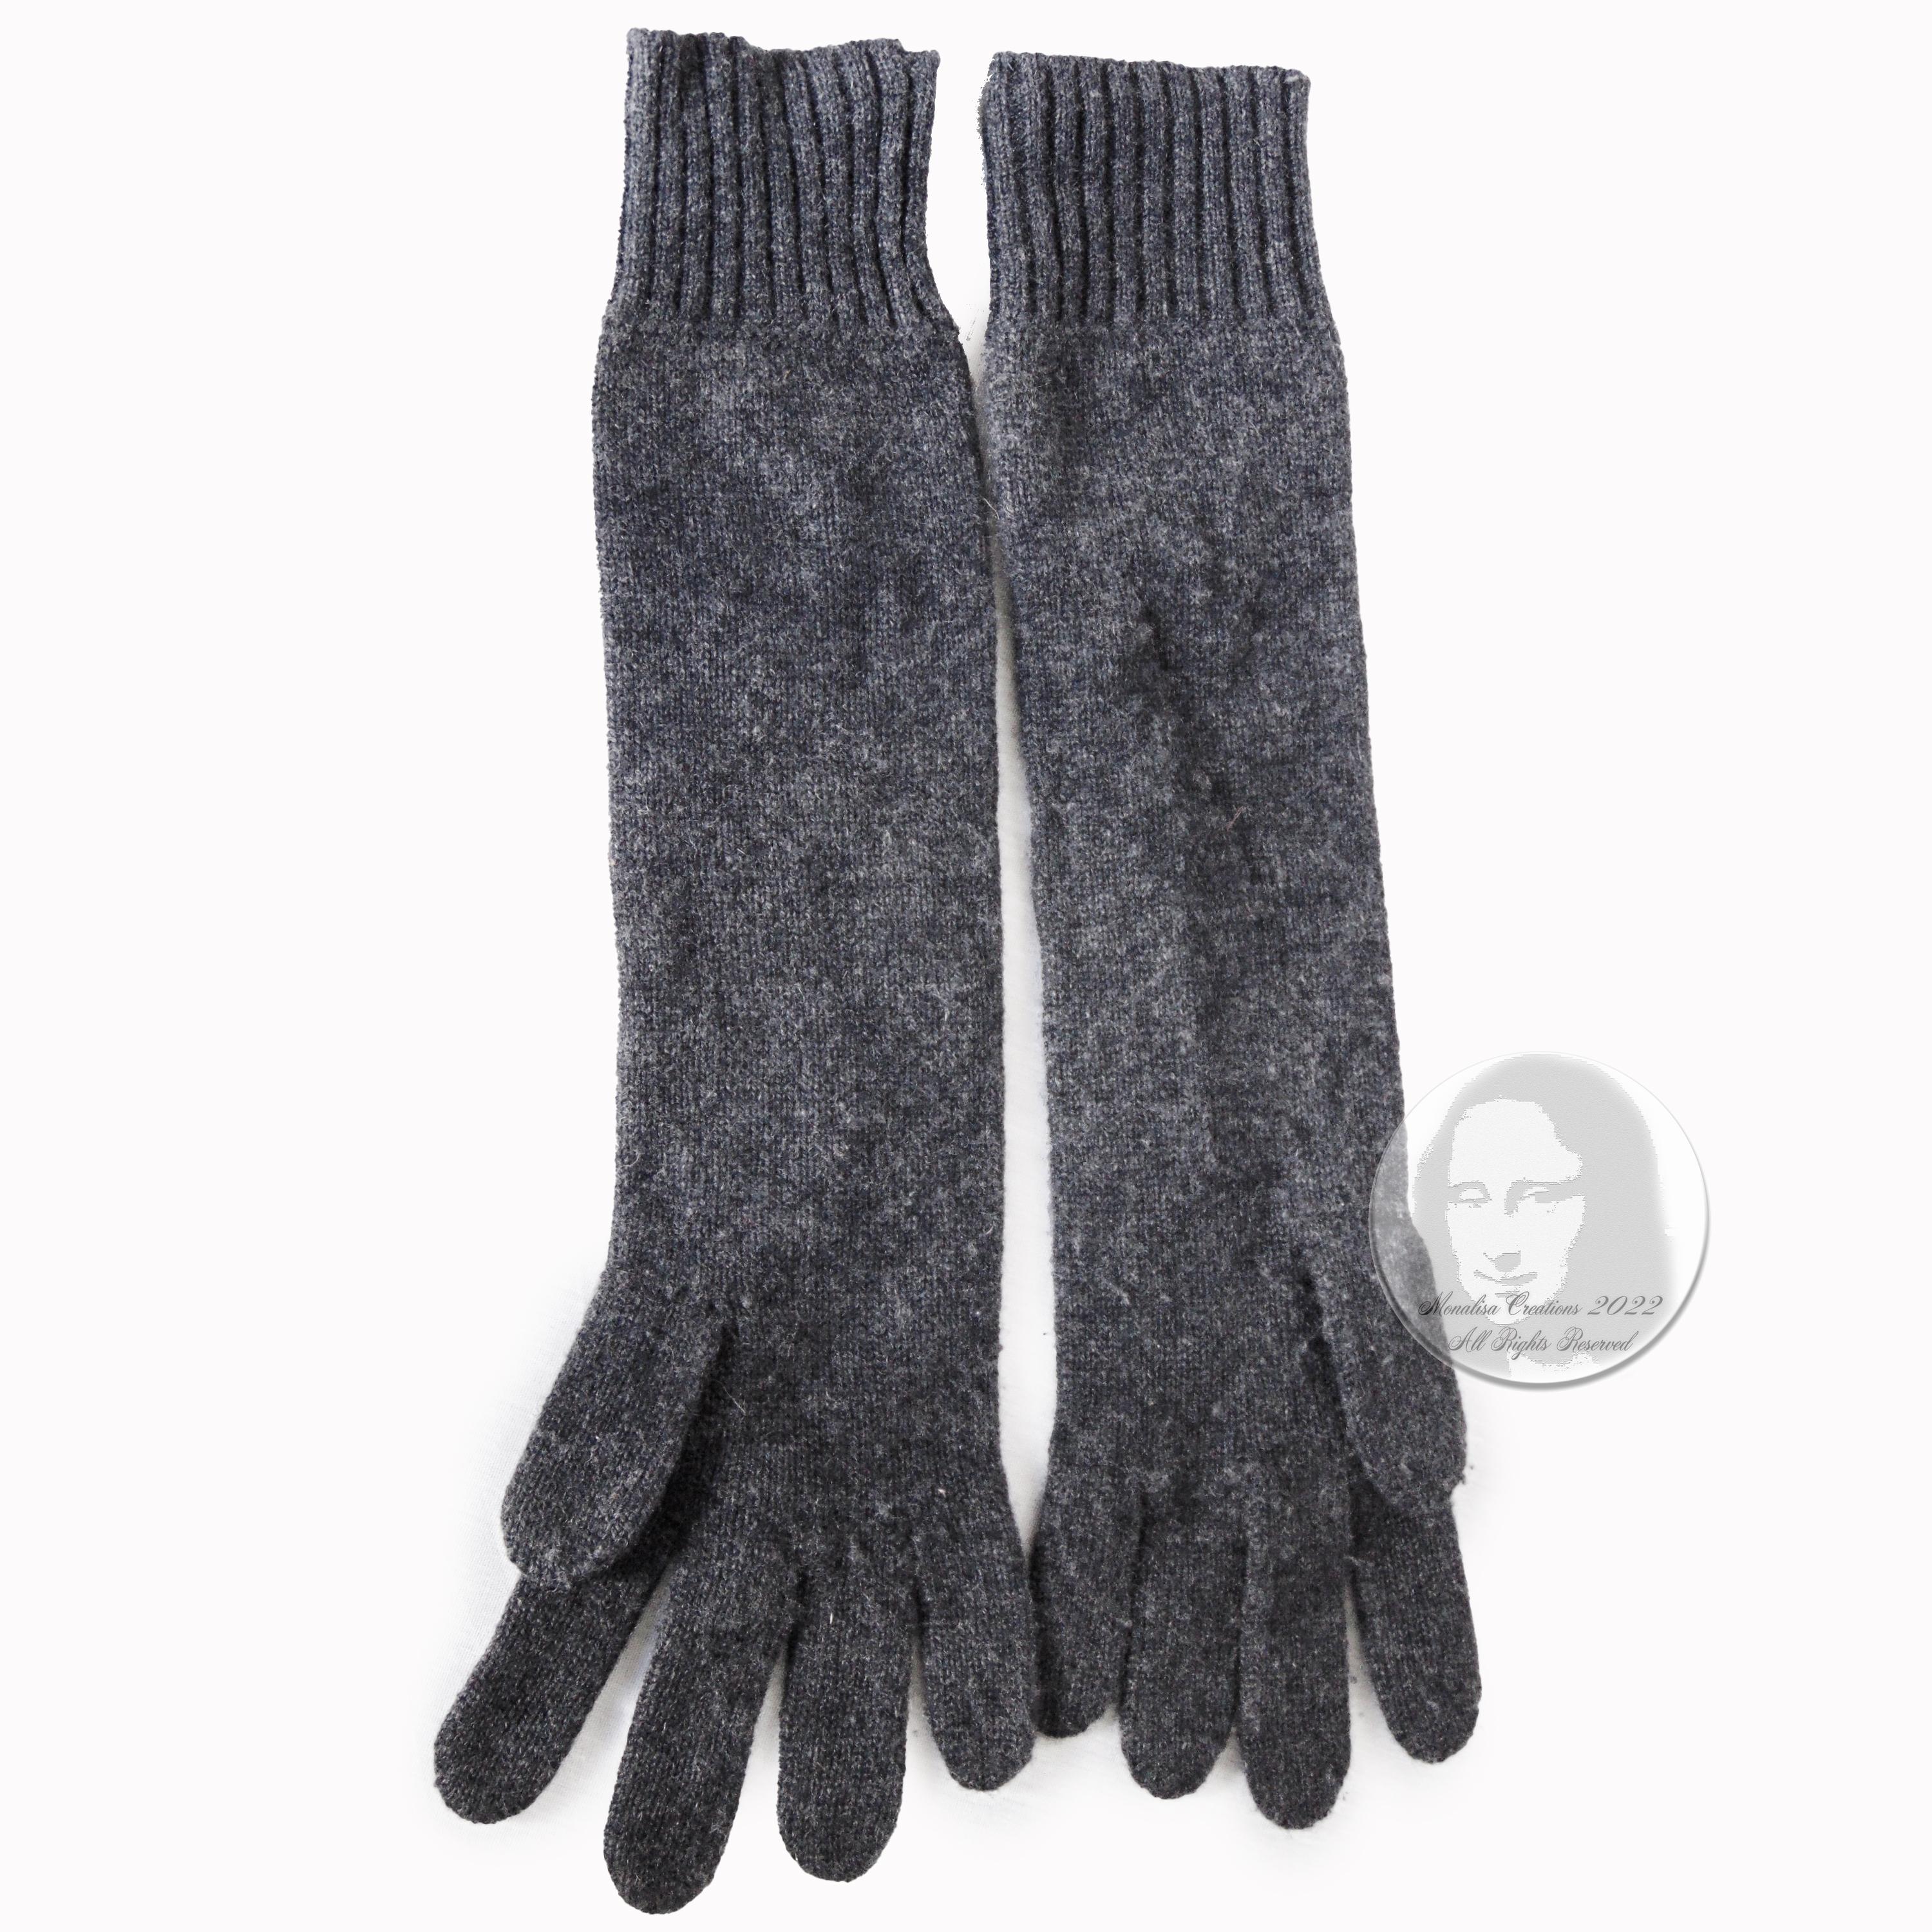 Hermes Gloves Ladies Cashmere Wool Knit Gris Charcoal Gray 3